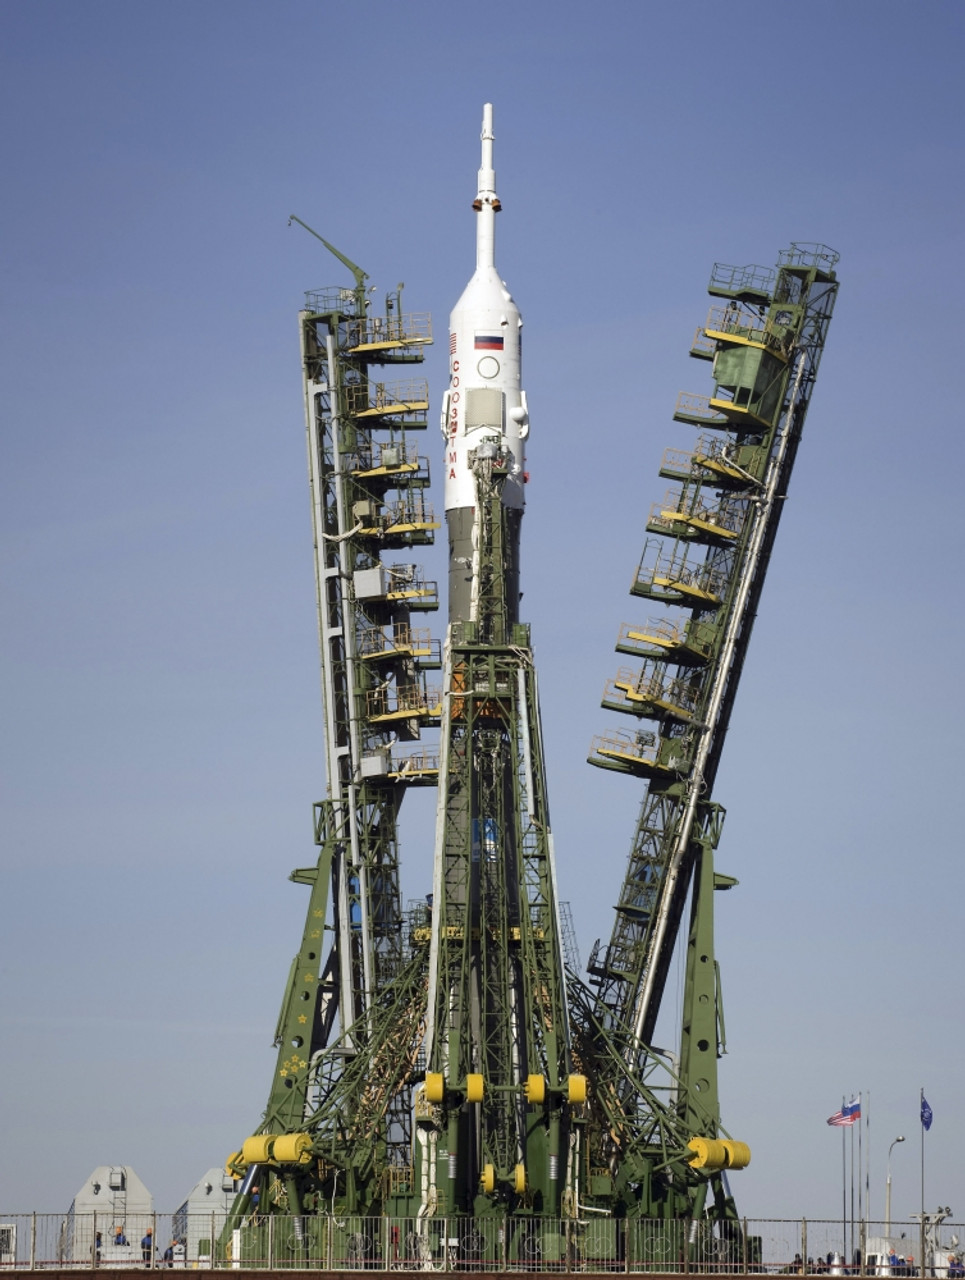 sin Injustice parade March 24, 2009 - The Soyuz rocket is erected into position at the launch pad  at the Baikonur Cosmodrome in Kazakhstan. Poster Print - Item #  VARPSTSTK202563S - Posterazzi